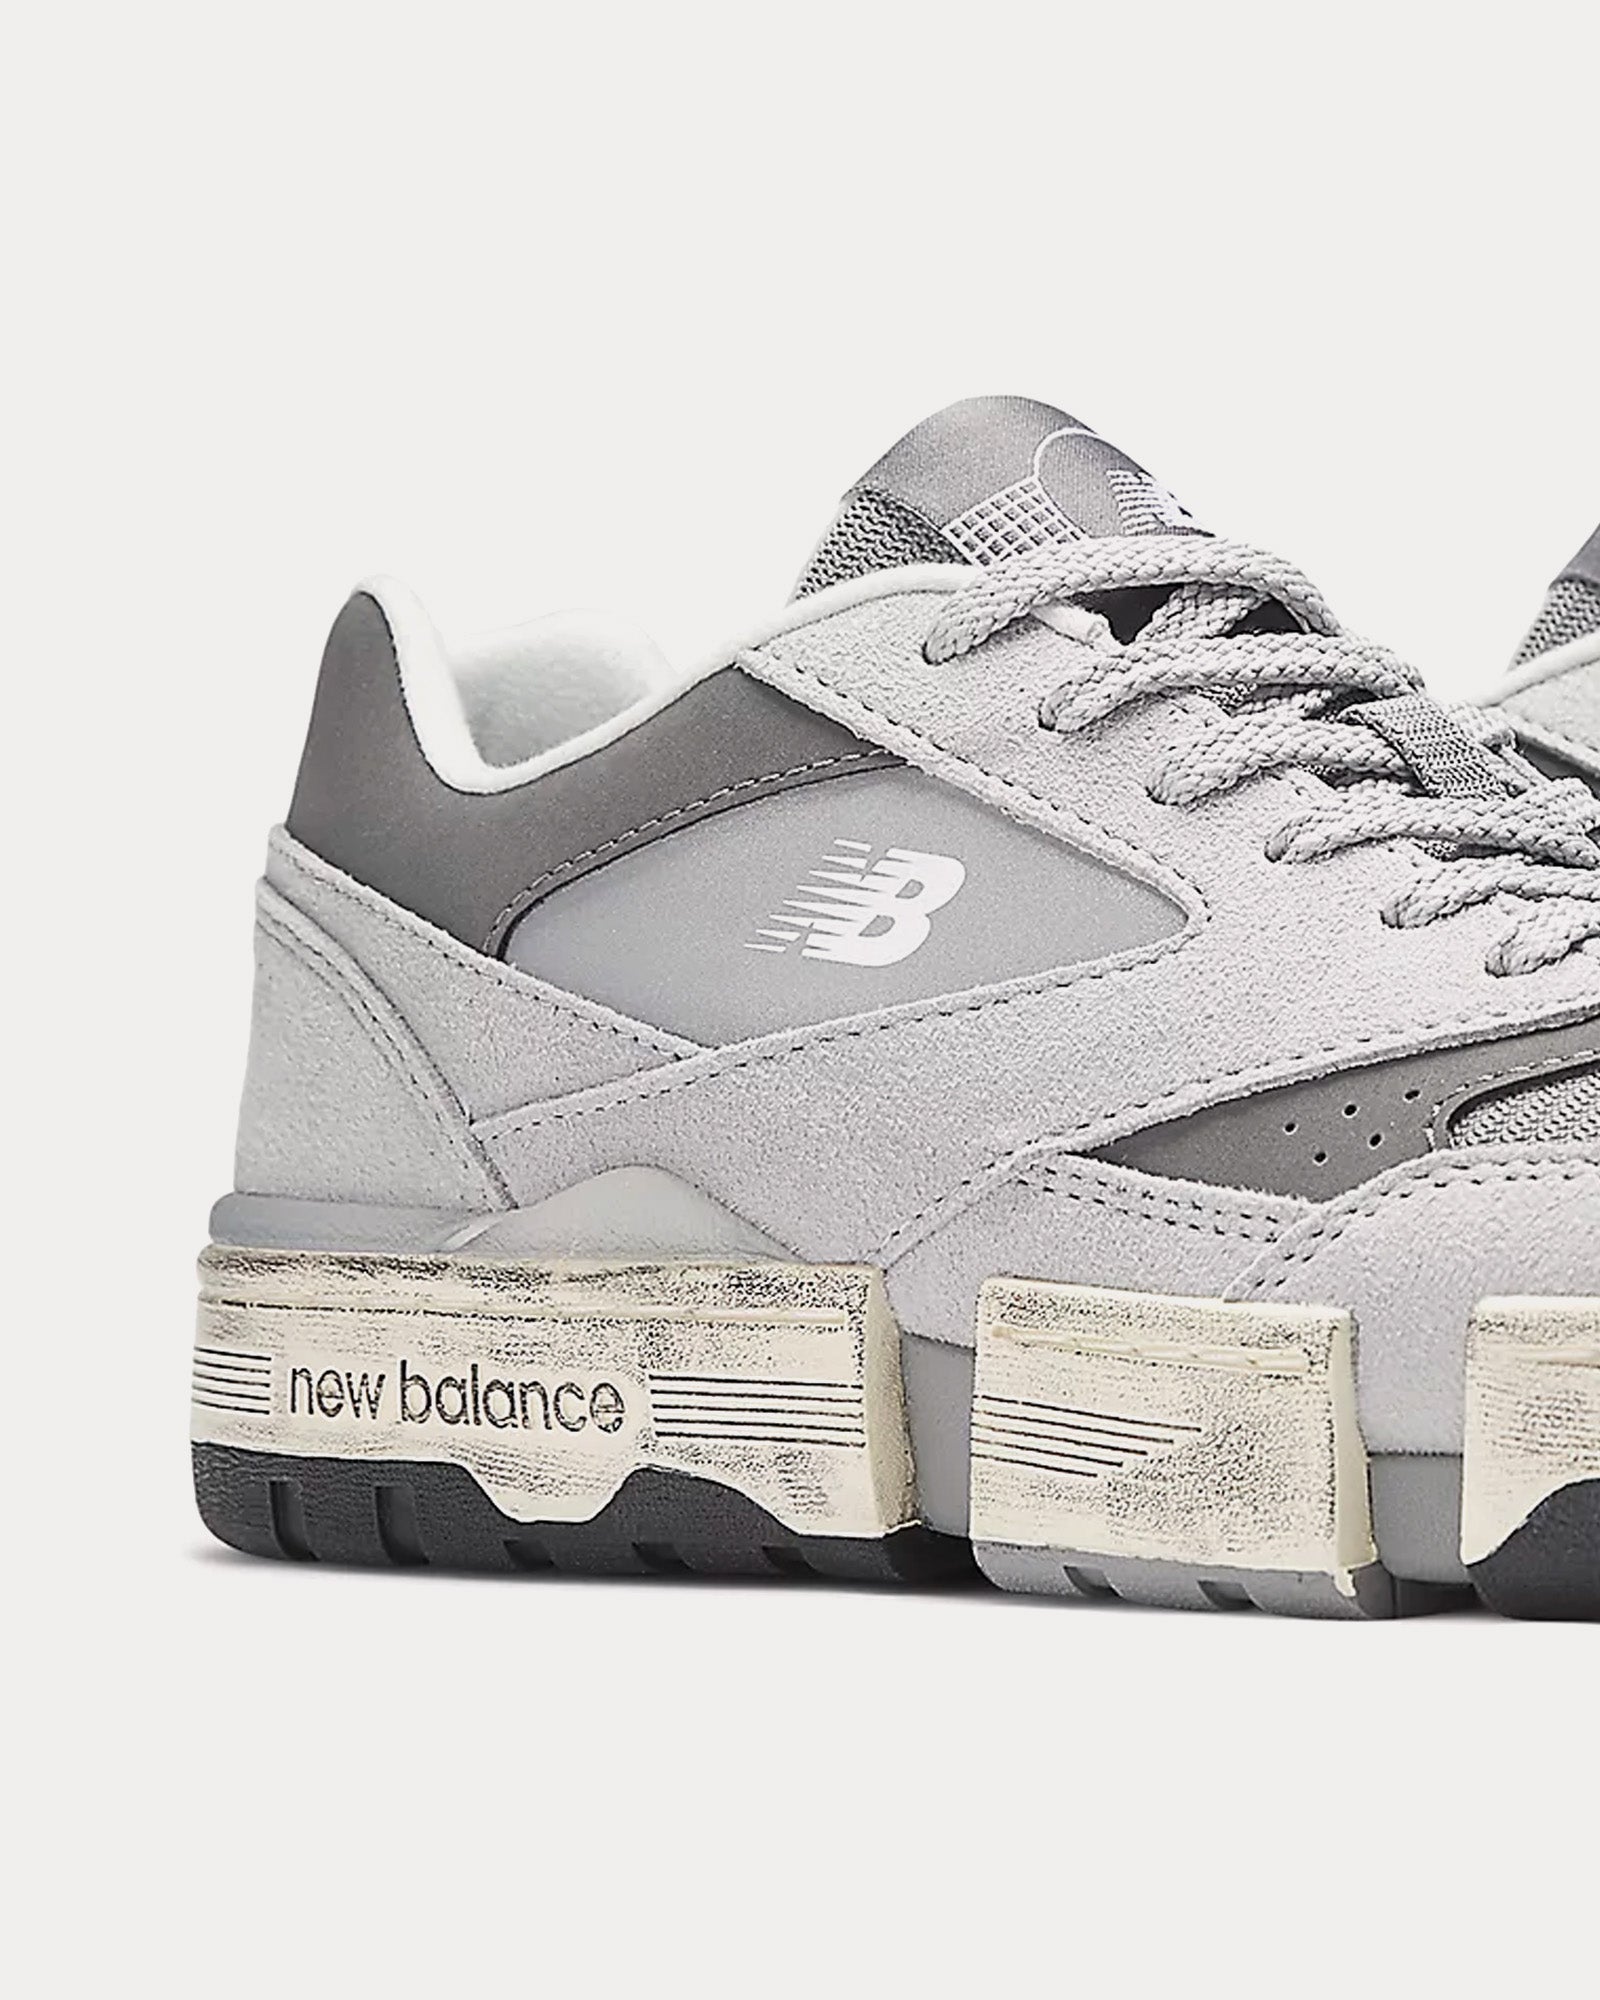 New Balance x MSFTrep - 0.01 Grey / White Low Top Sneakers